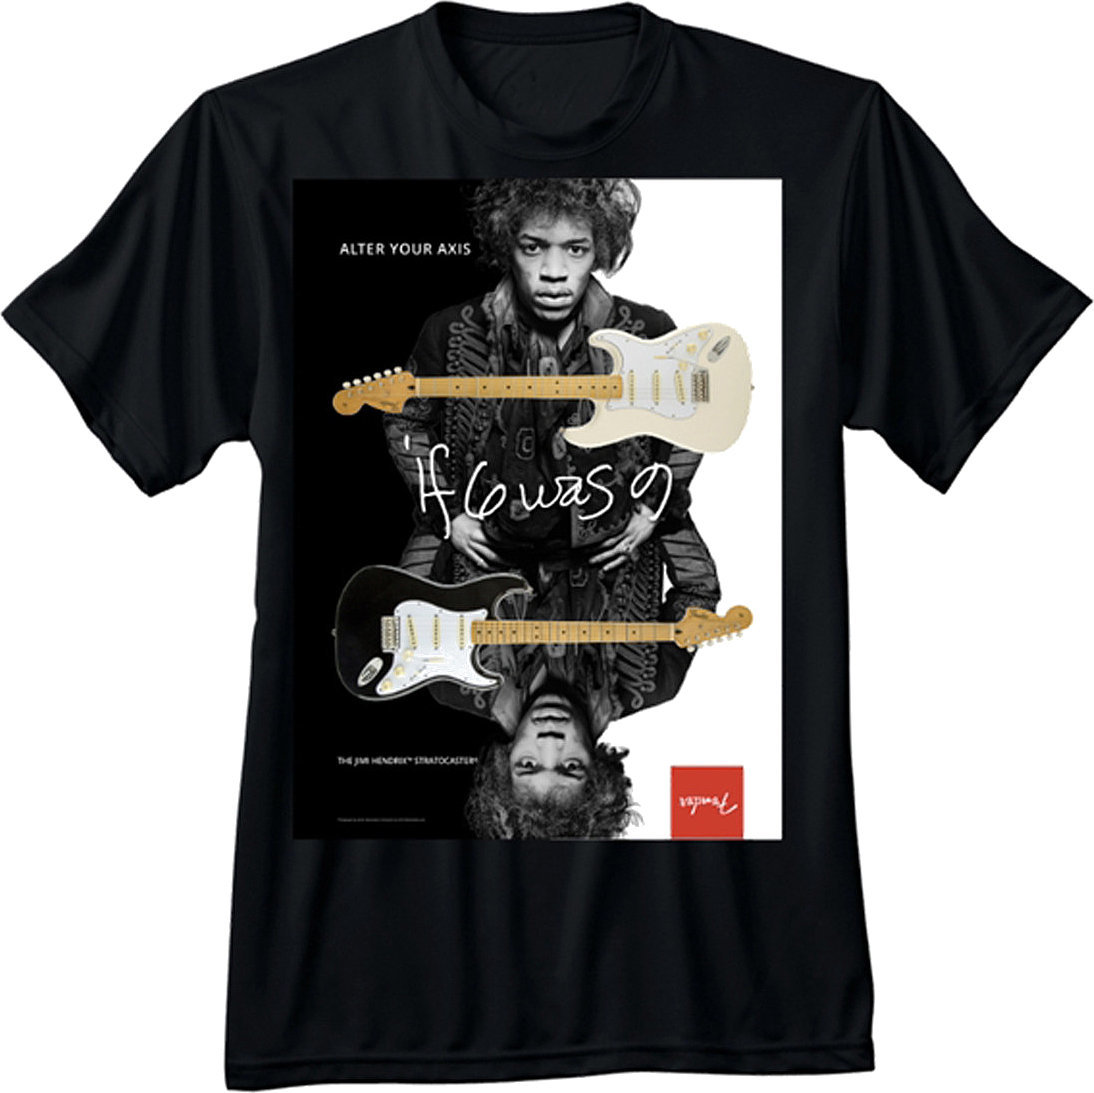 Ing Fender Jimi Hendrix Collection Alter Your Axis T-Shirt Black M